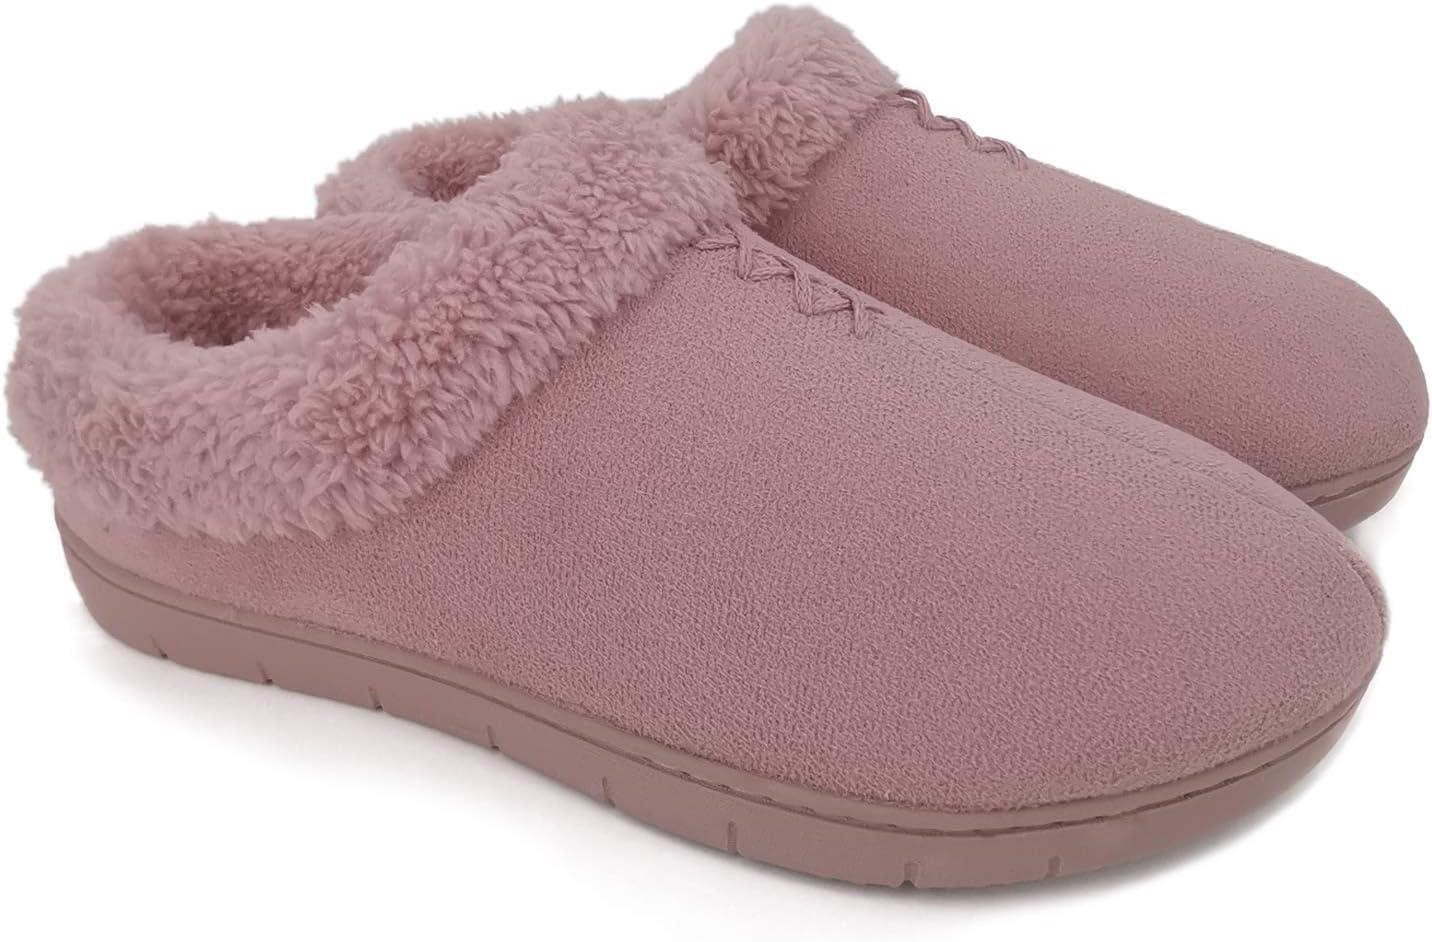 SEALED-ofoot Women's Warm Moccasin Slippers